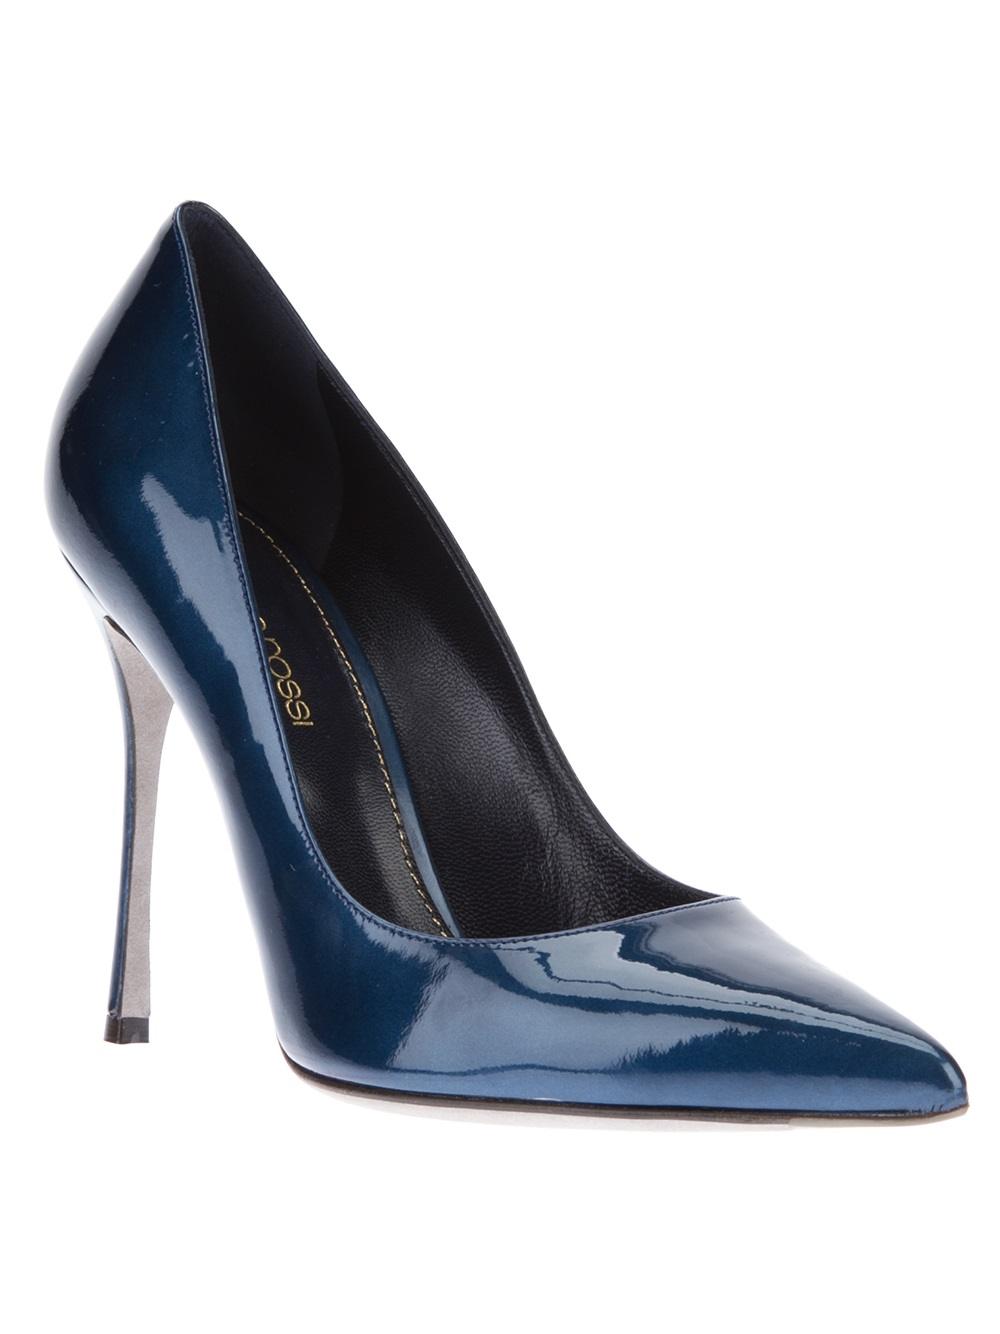 Sergio Rossi Pointed Toe Pump in Blue - Lyst